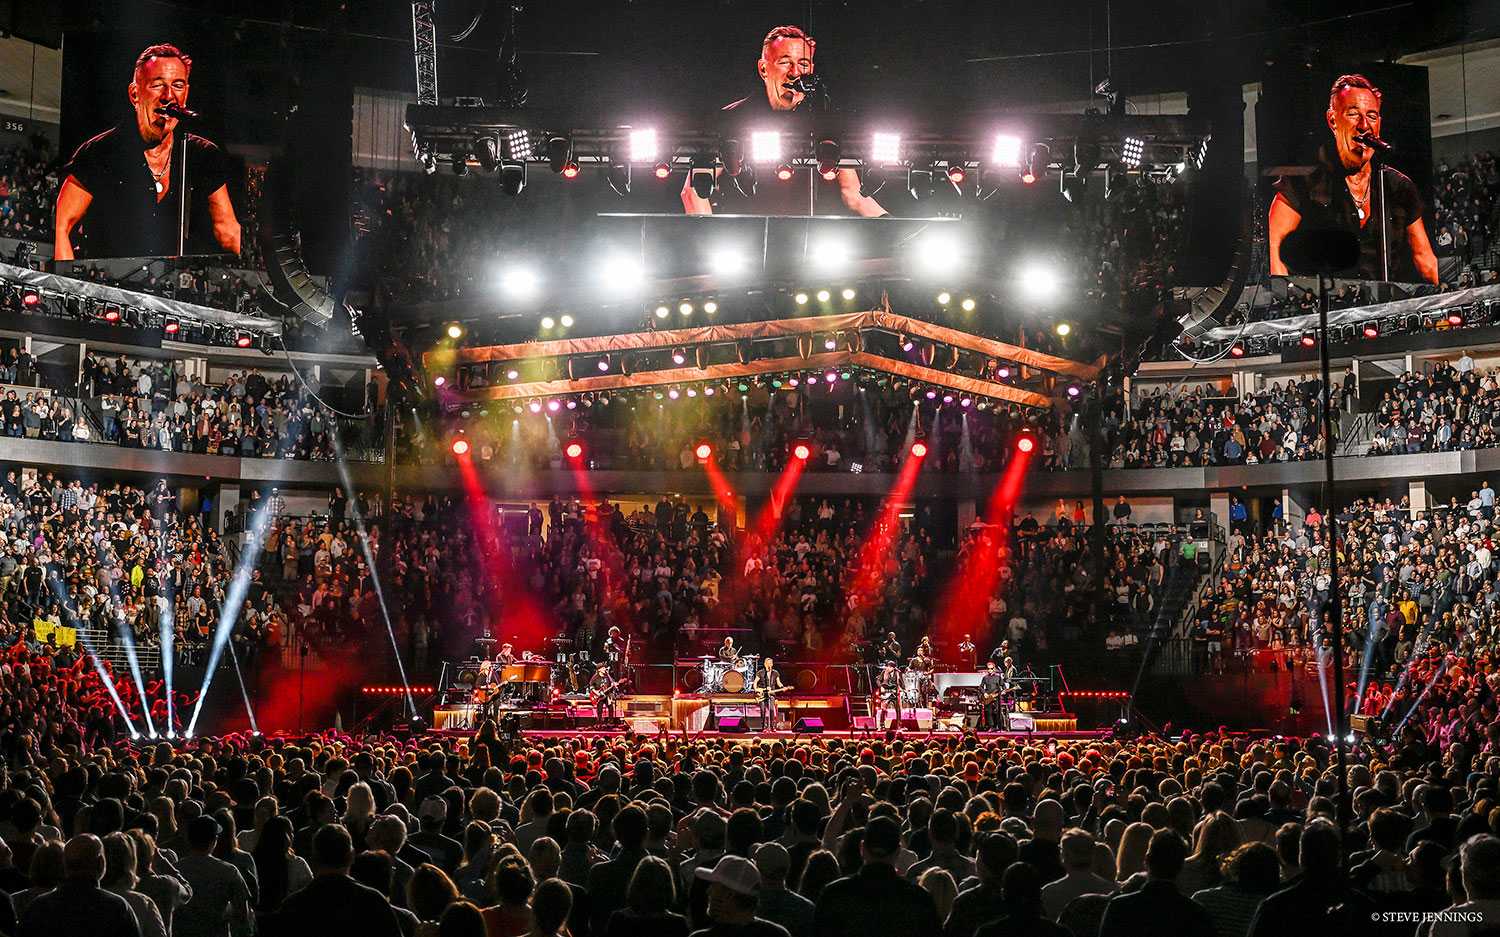 Jeff Ravitz’s design for the tour’s 360ﹾ stage has trussing that outlines the four corners of the room (photo: Steve Jennings)